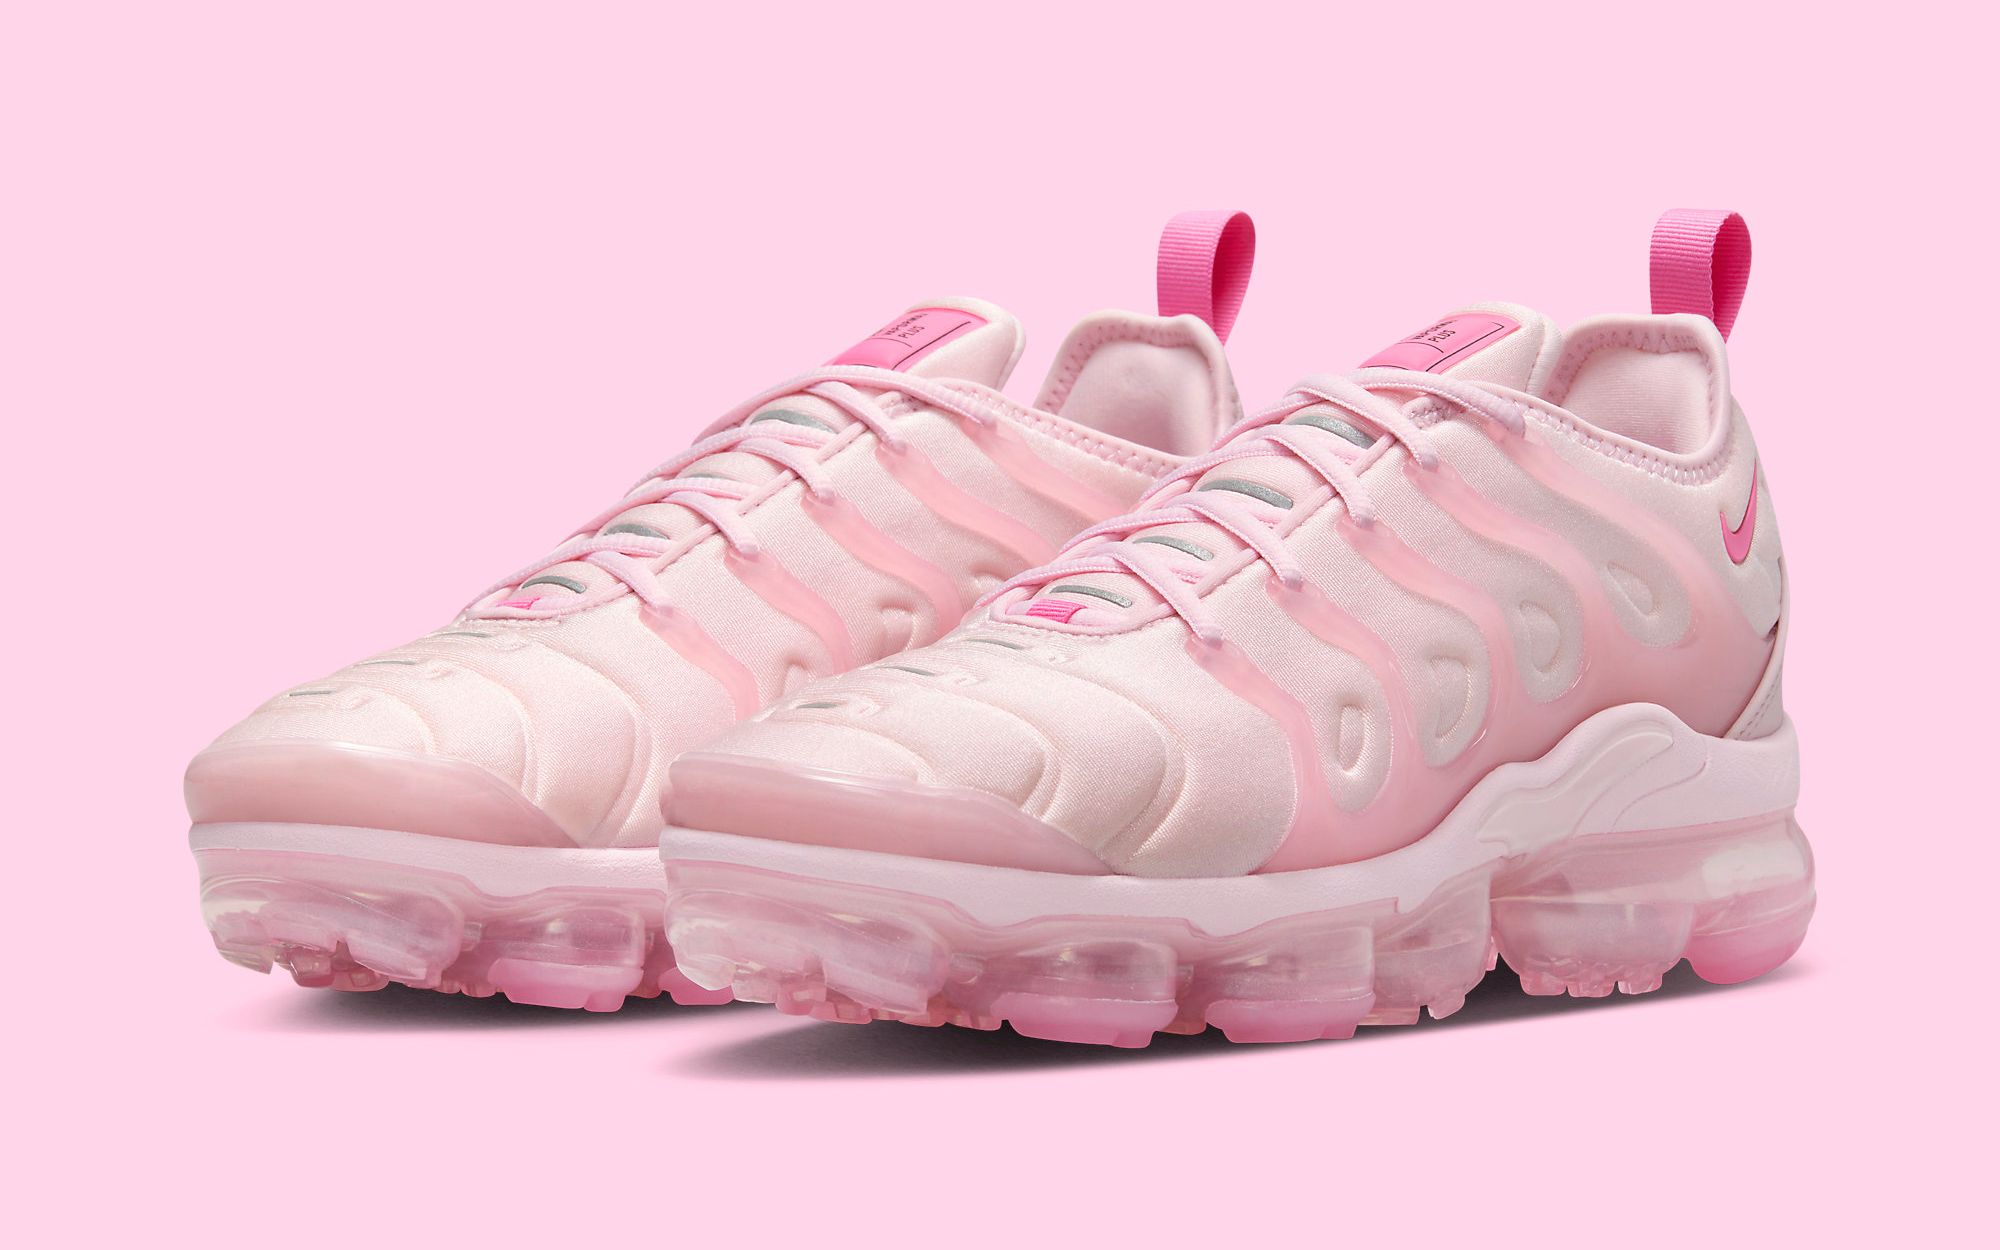 The Nike Air VaporMax Plus Pops Up in Playful Pink